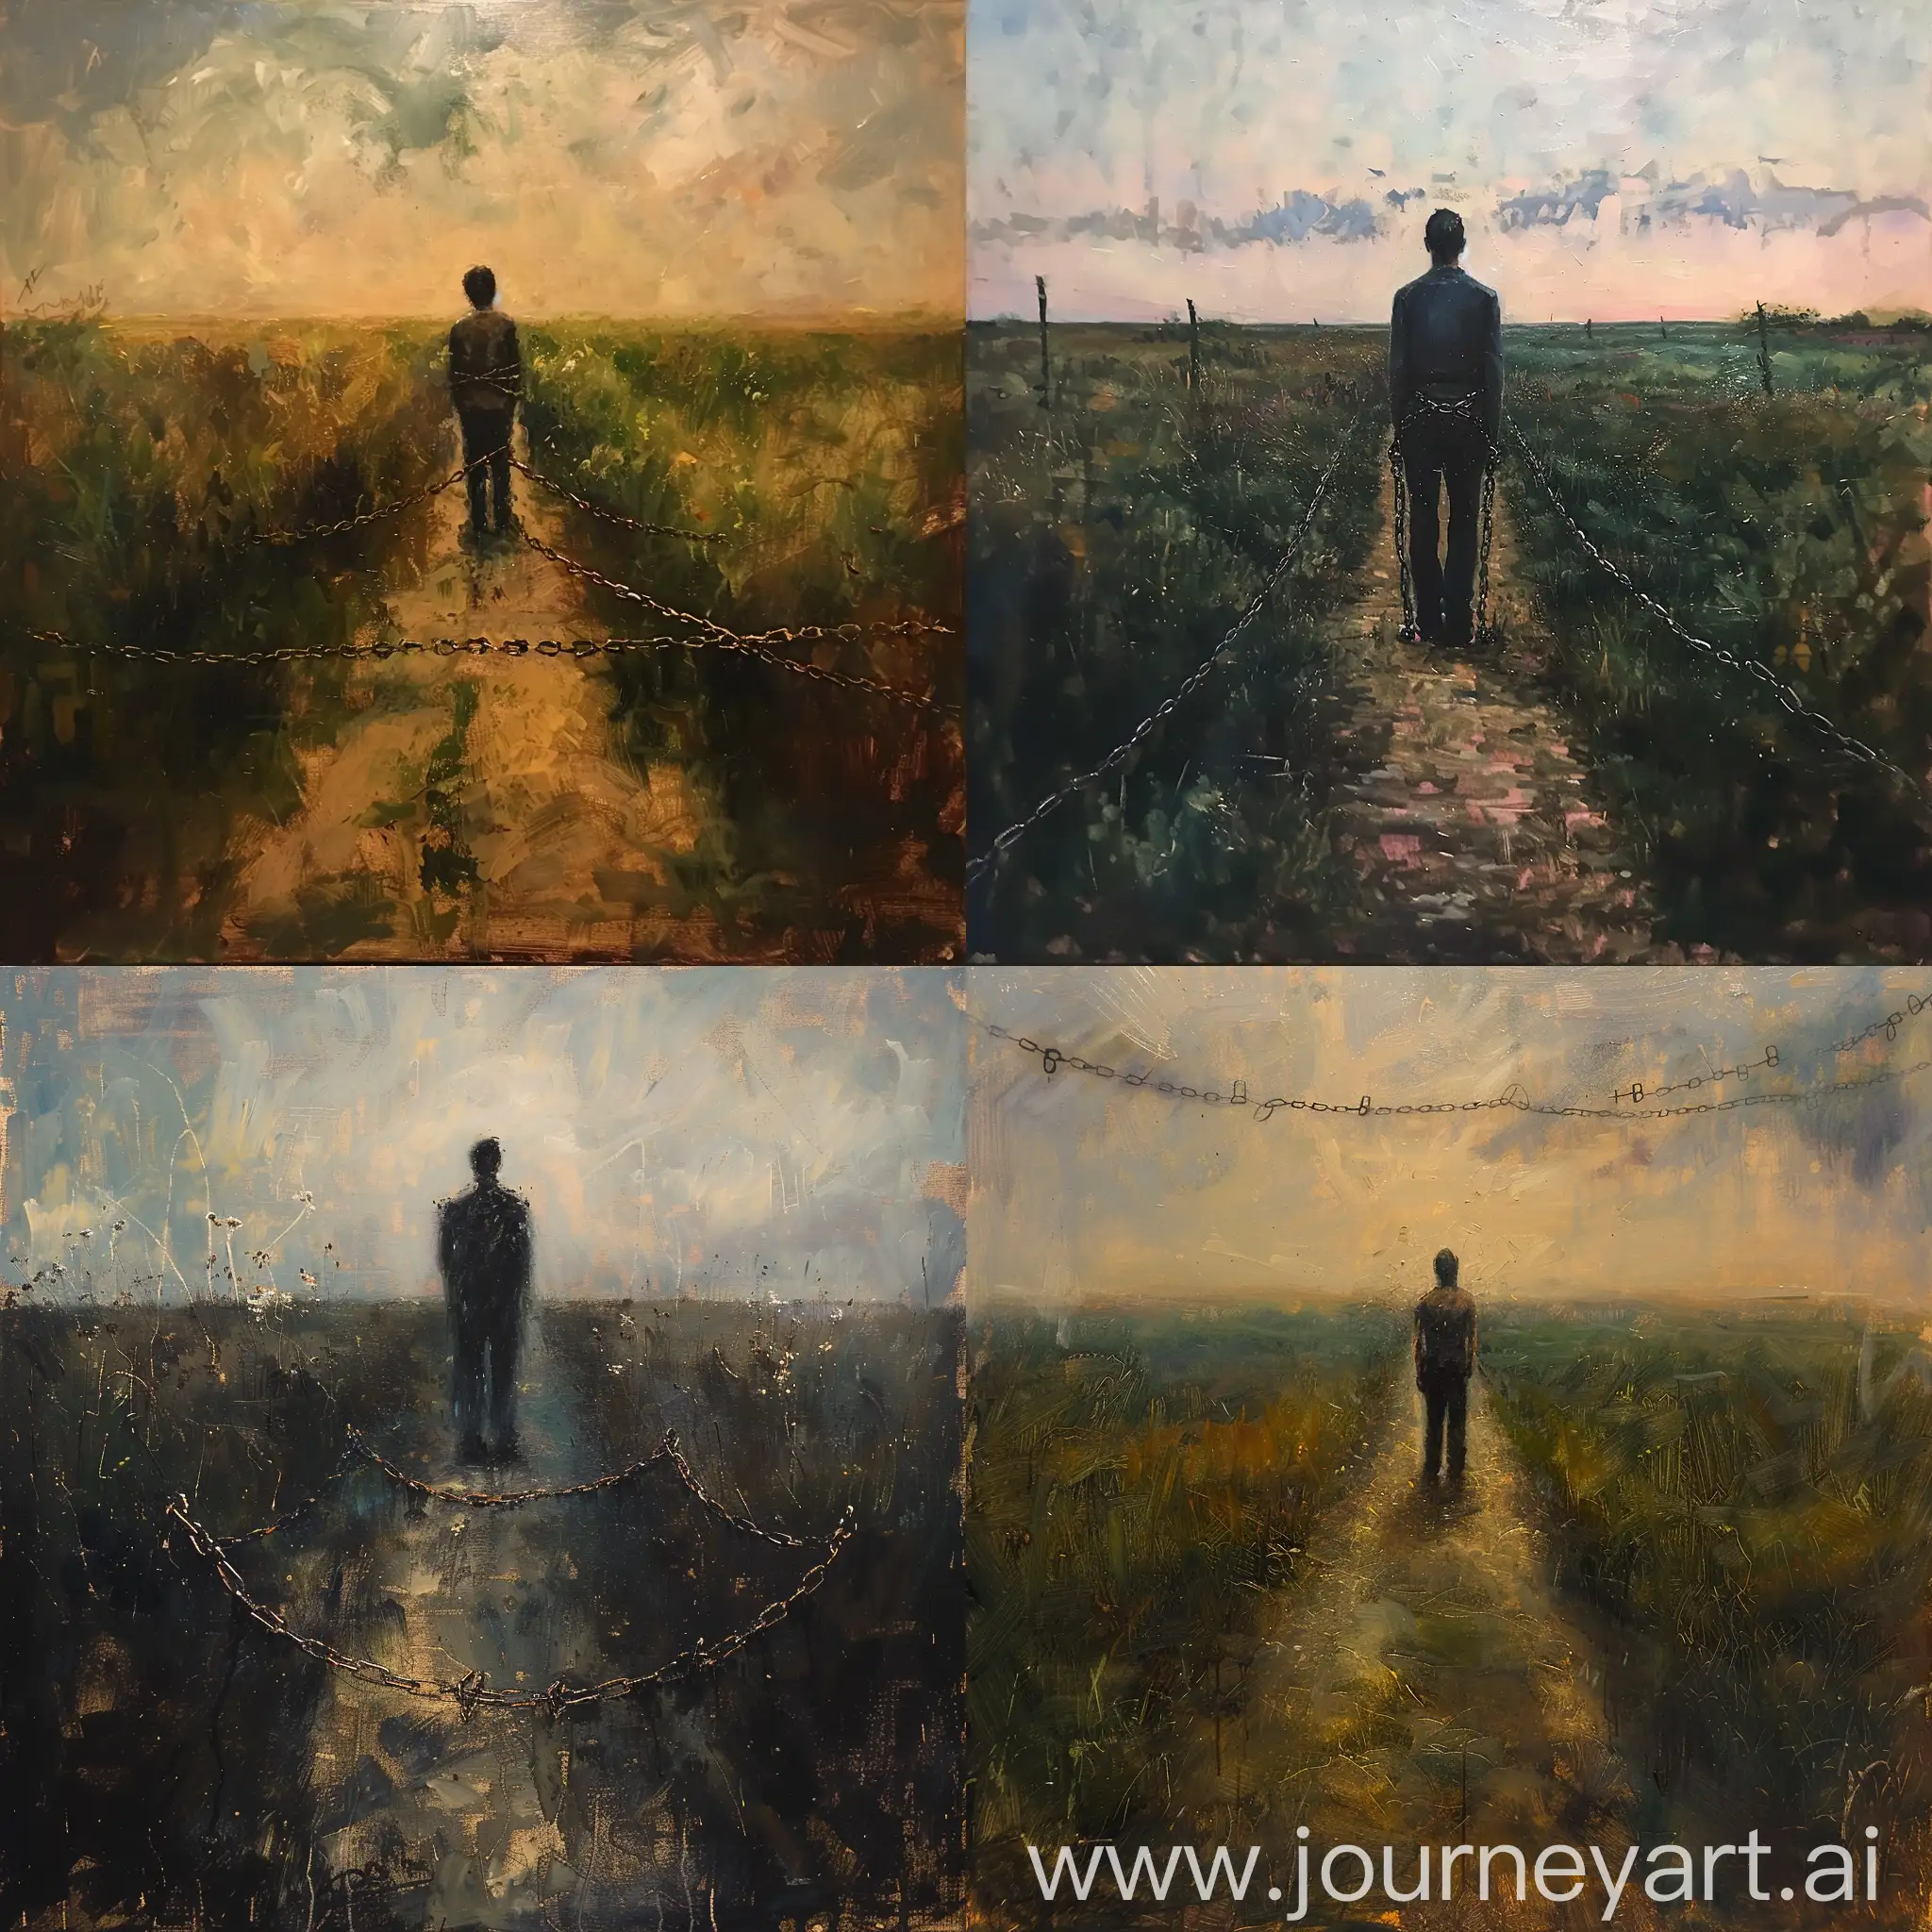 Solitary-Man-Bound-by-Chains-in-Melancholic-Field-Painting